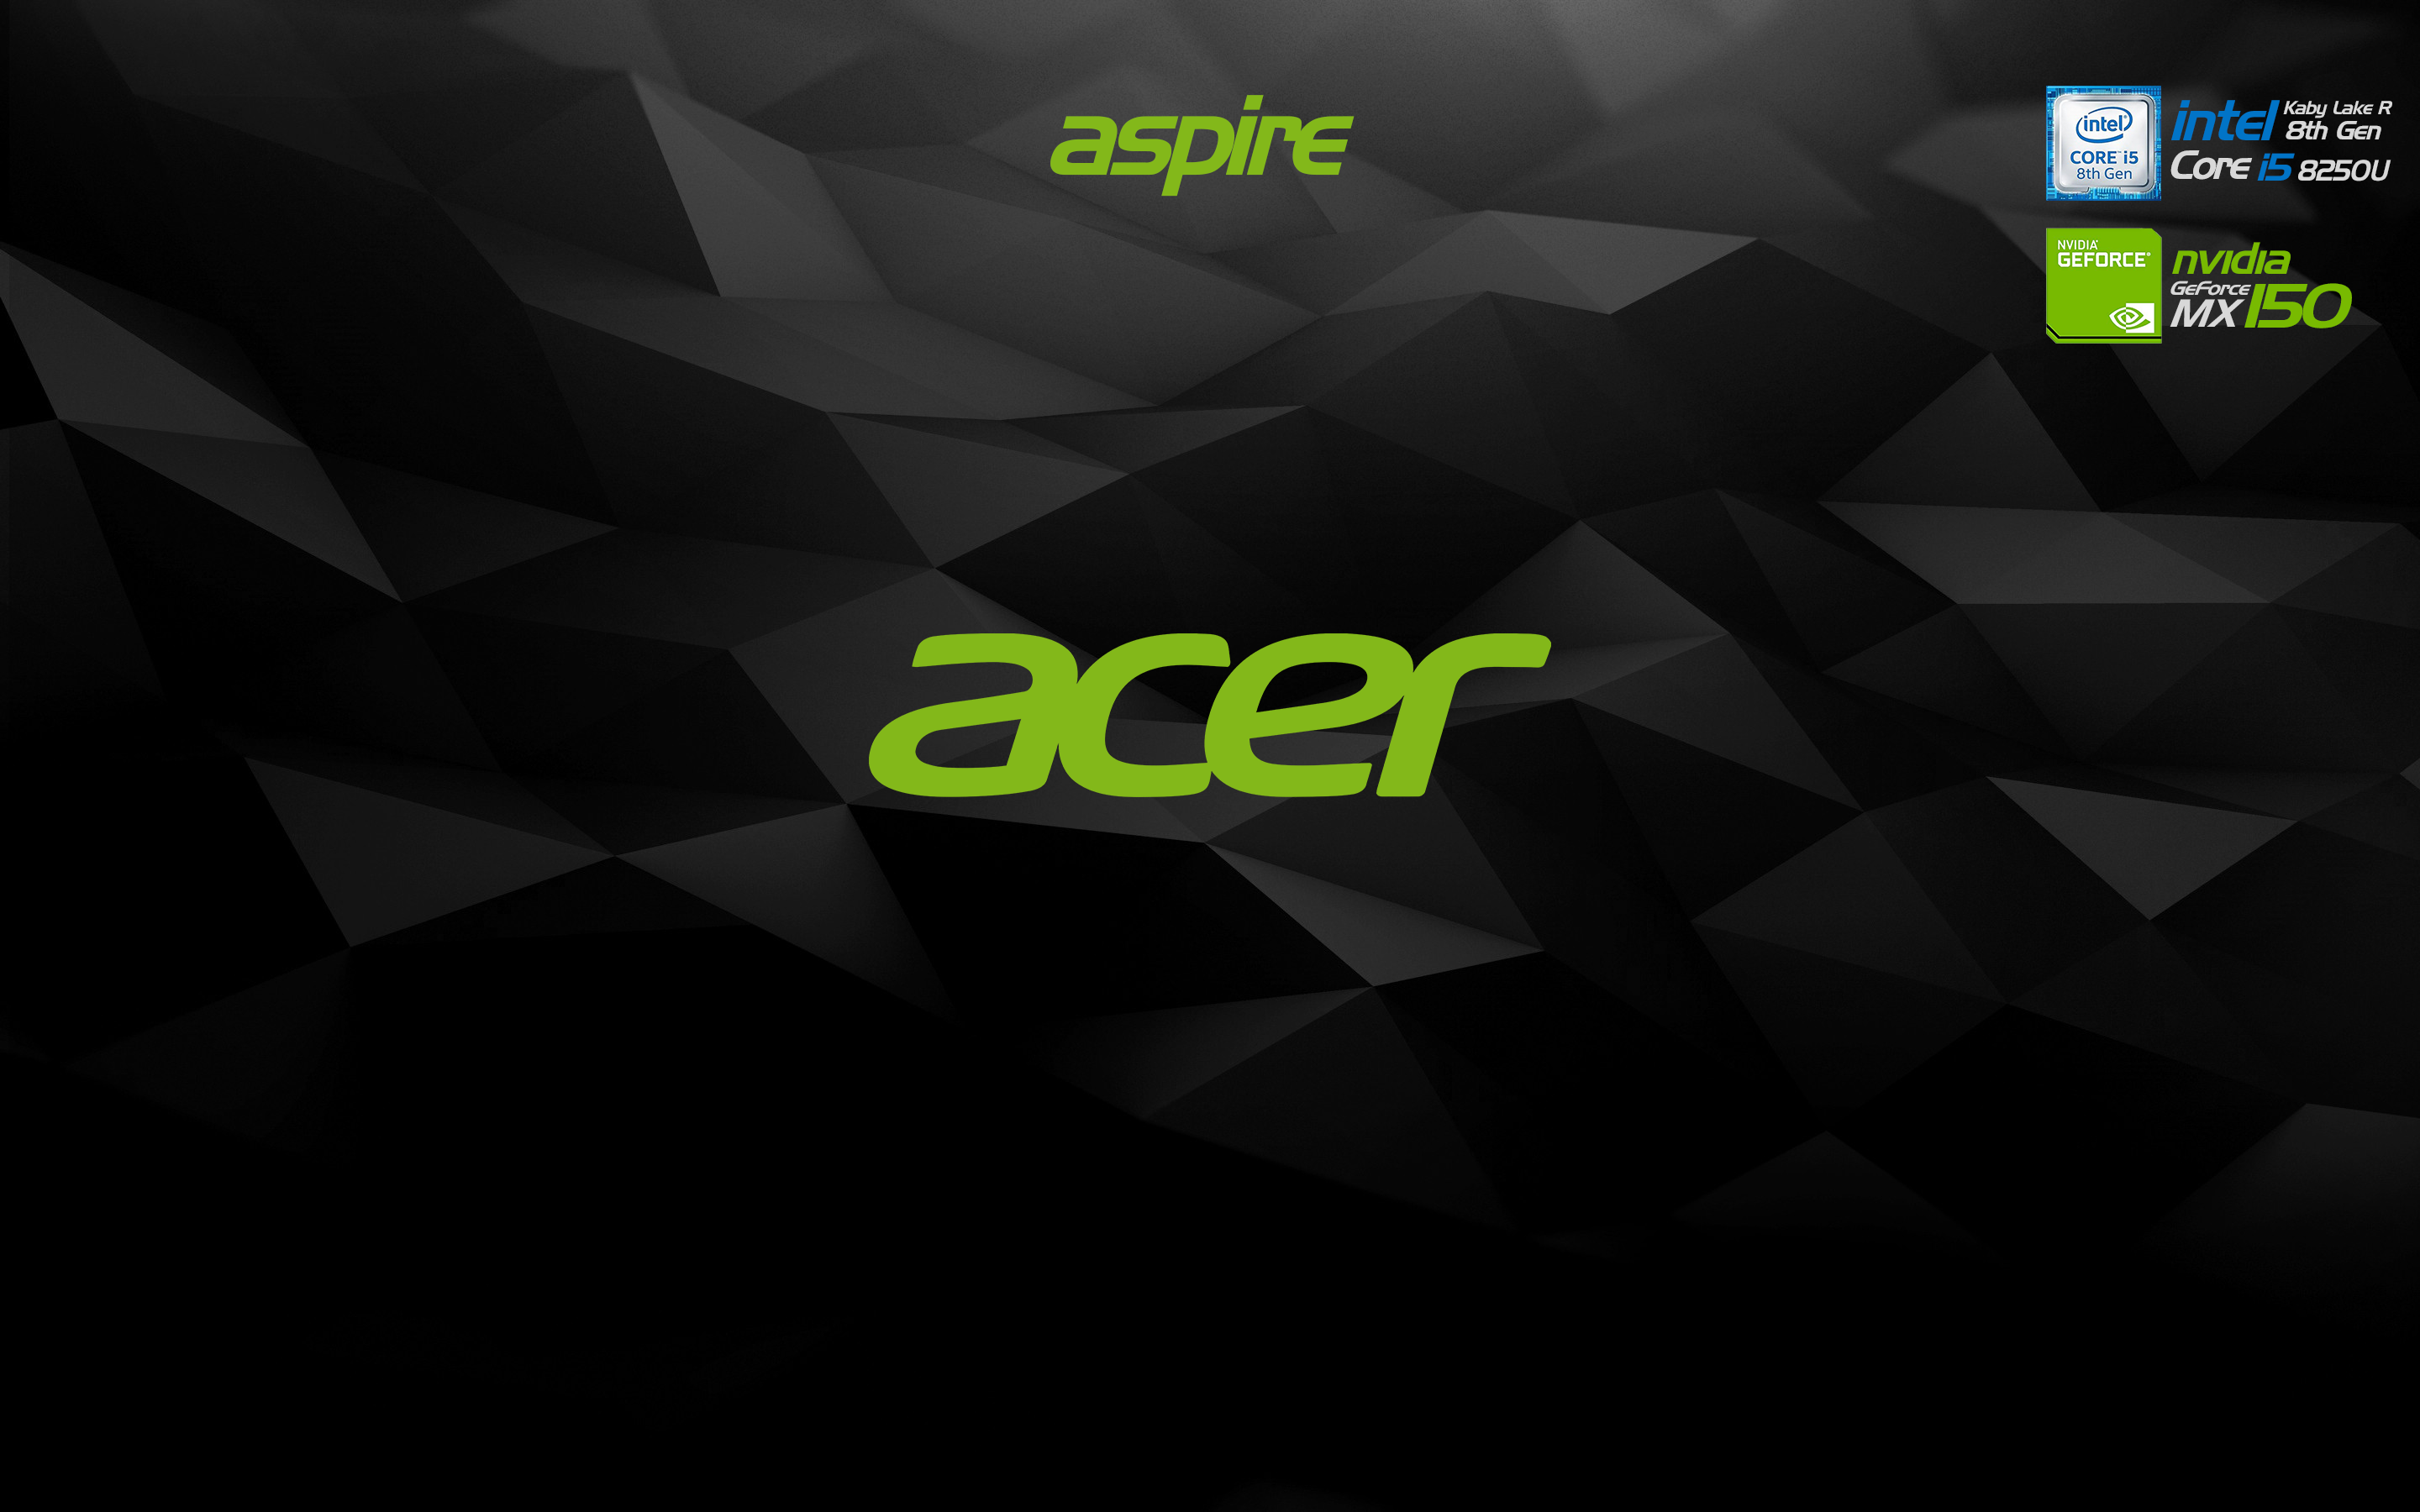 Wallpaper made by me for Acer Aspire